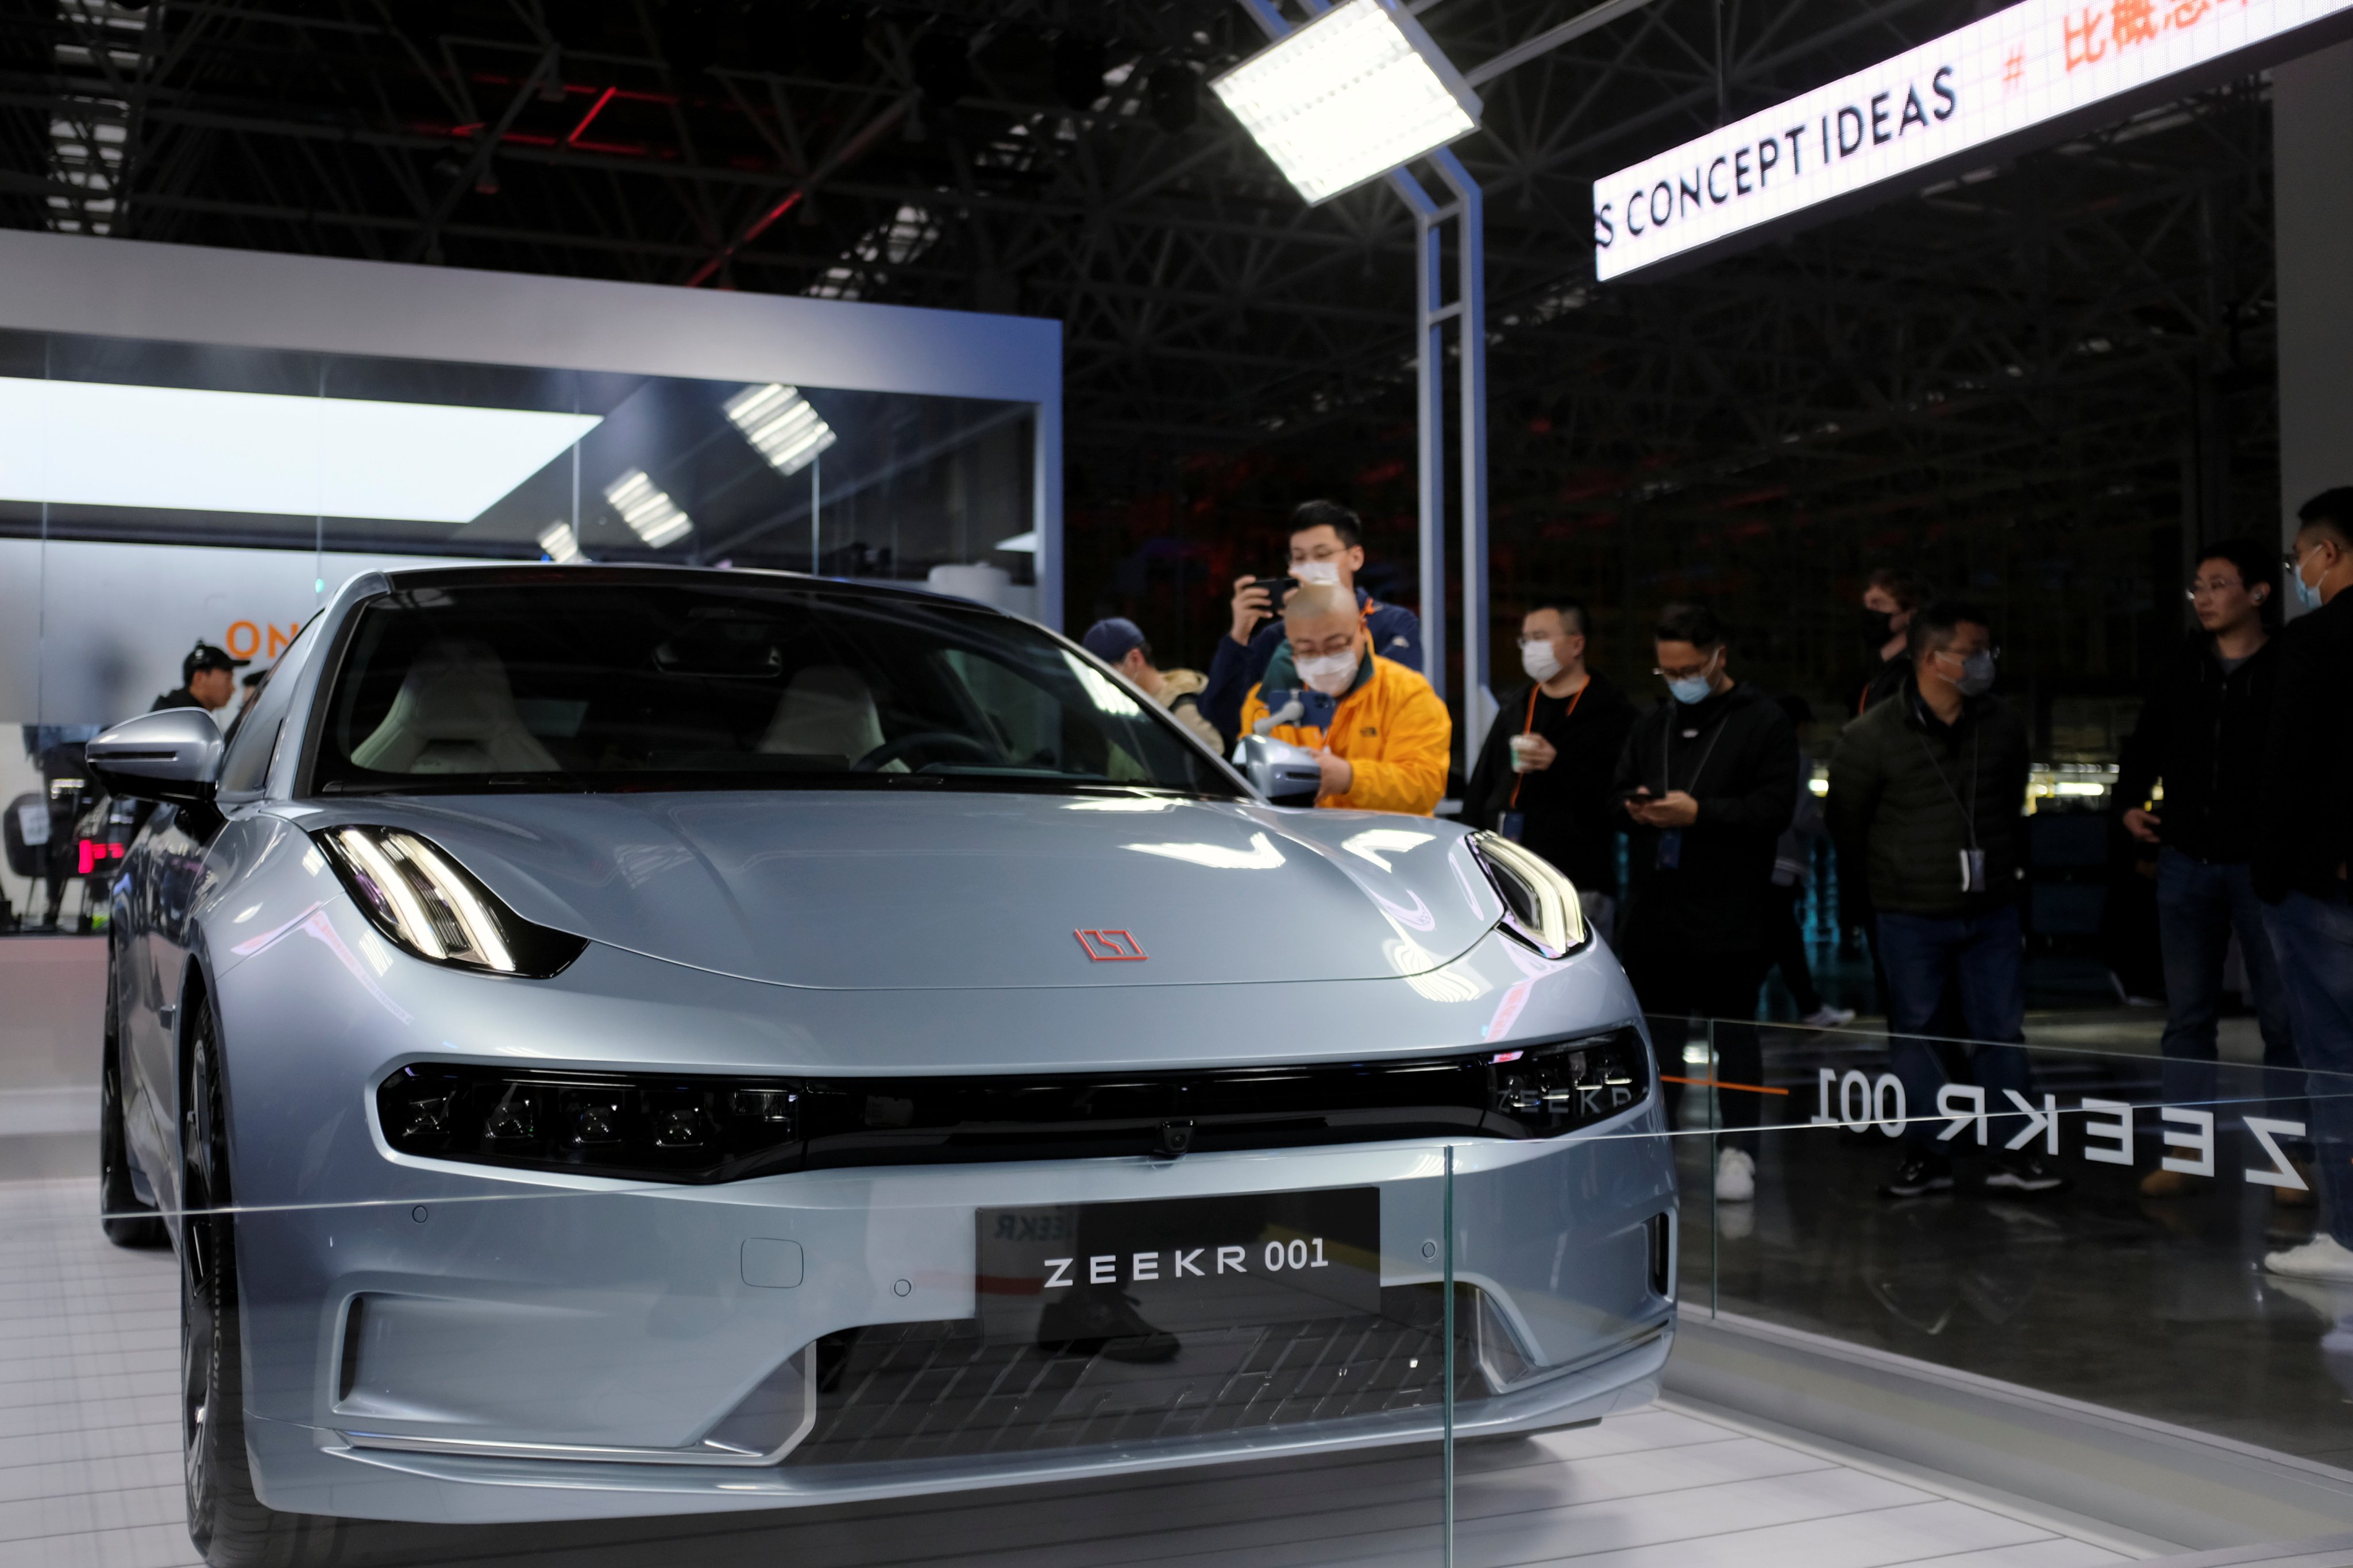 Visitors check out a Zeekr 001, a model from Geely’s premium electric vehicle (EV) brand Zeekr, at its factory in Ningbo, Zhejiang province, on April 15, 2021. Photo: Reuters